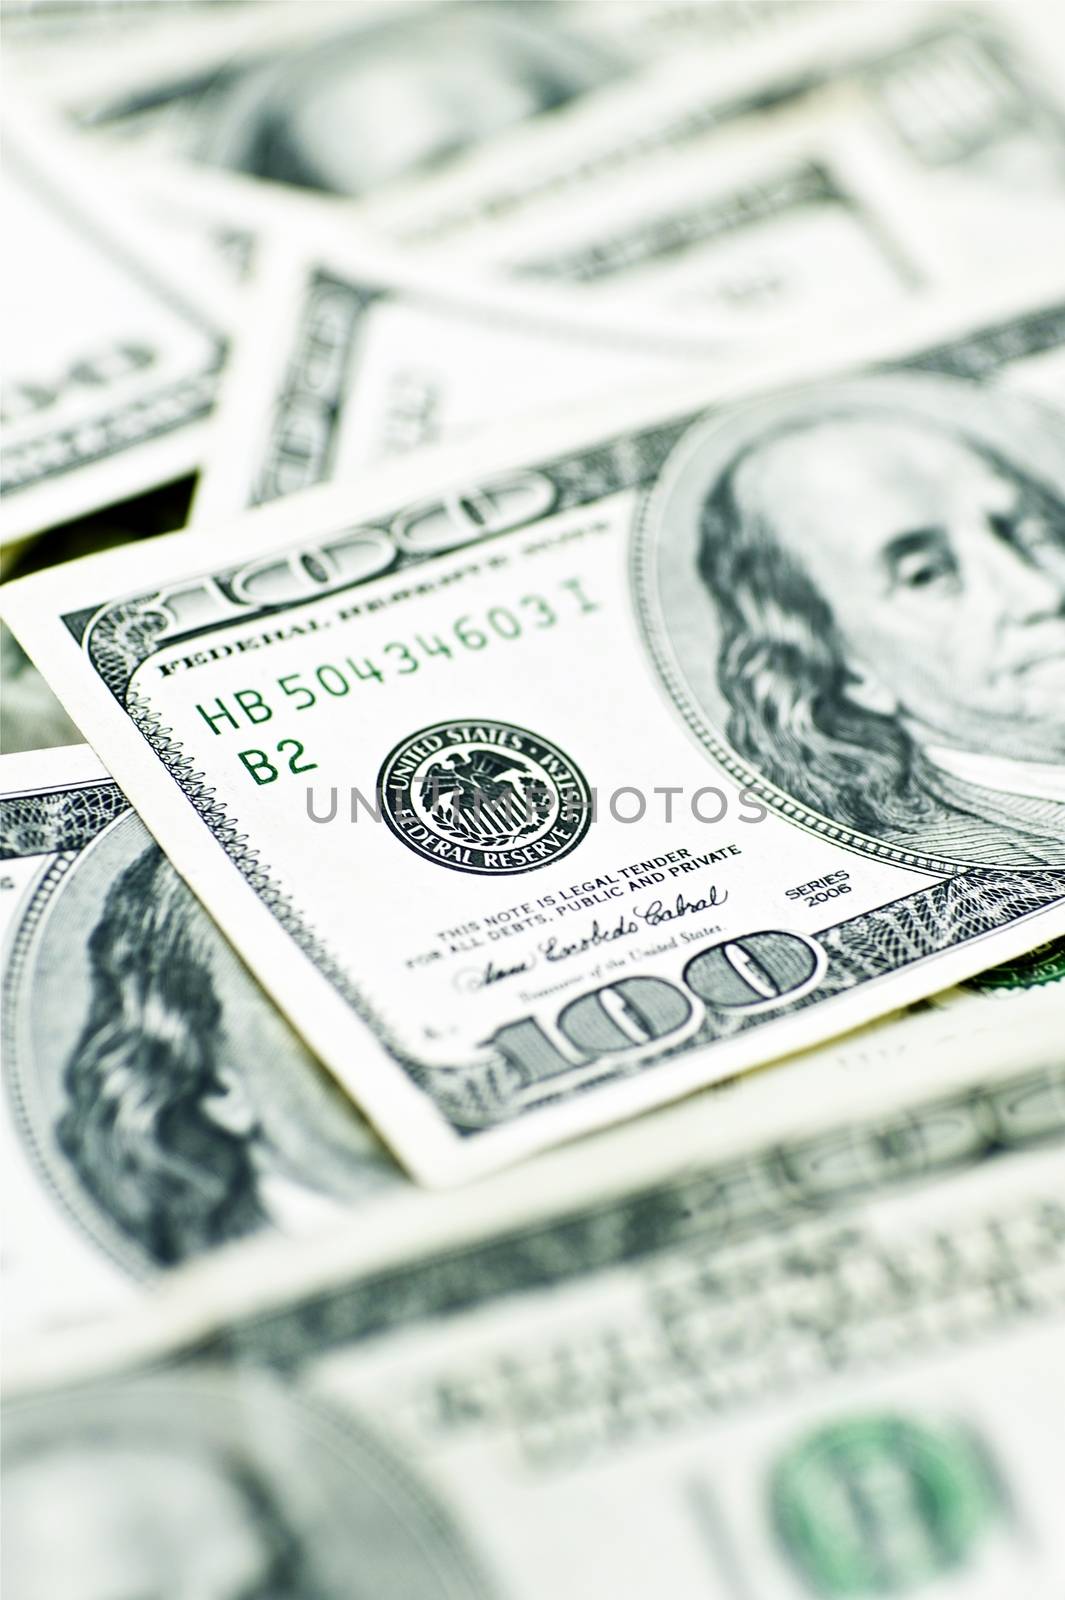 American Money. USD - American Dollars. One Hundred Bills. Business Photo Background.